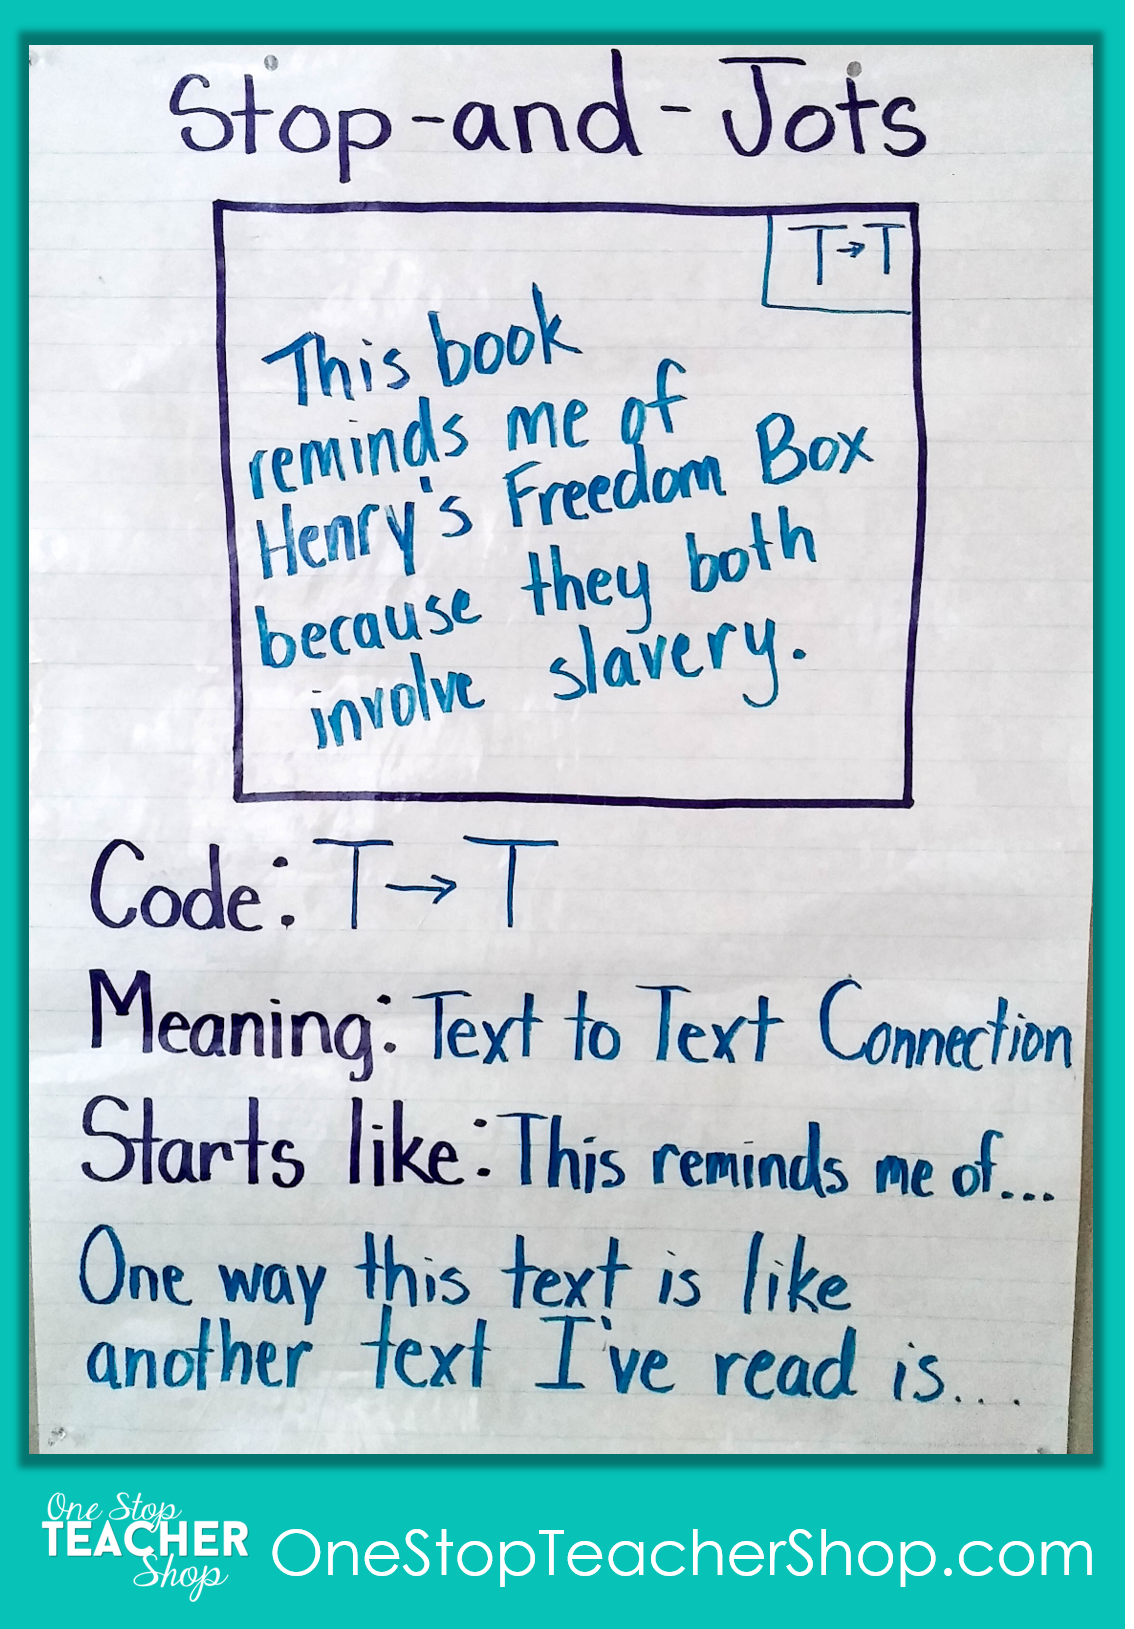 Reading Workshop Anchor Charts